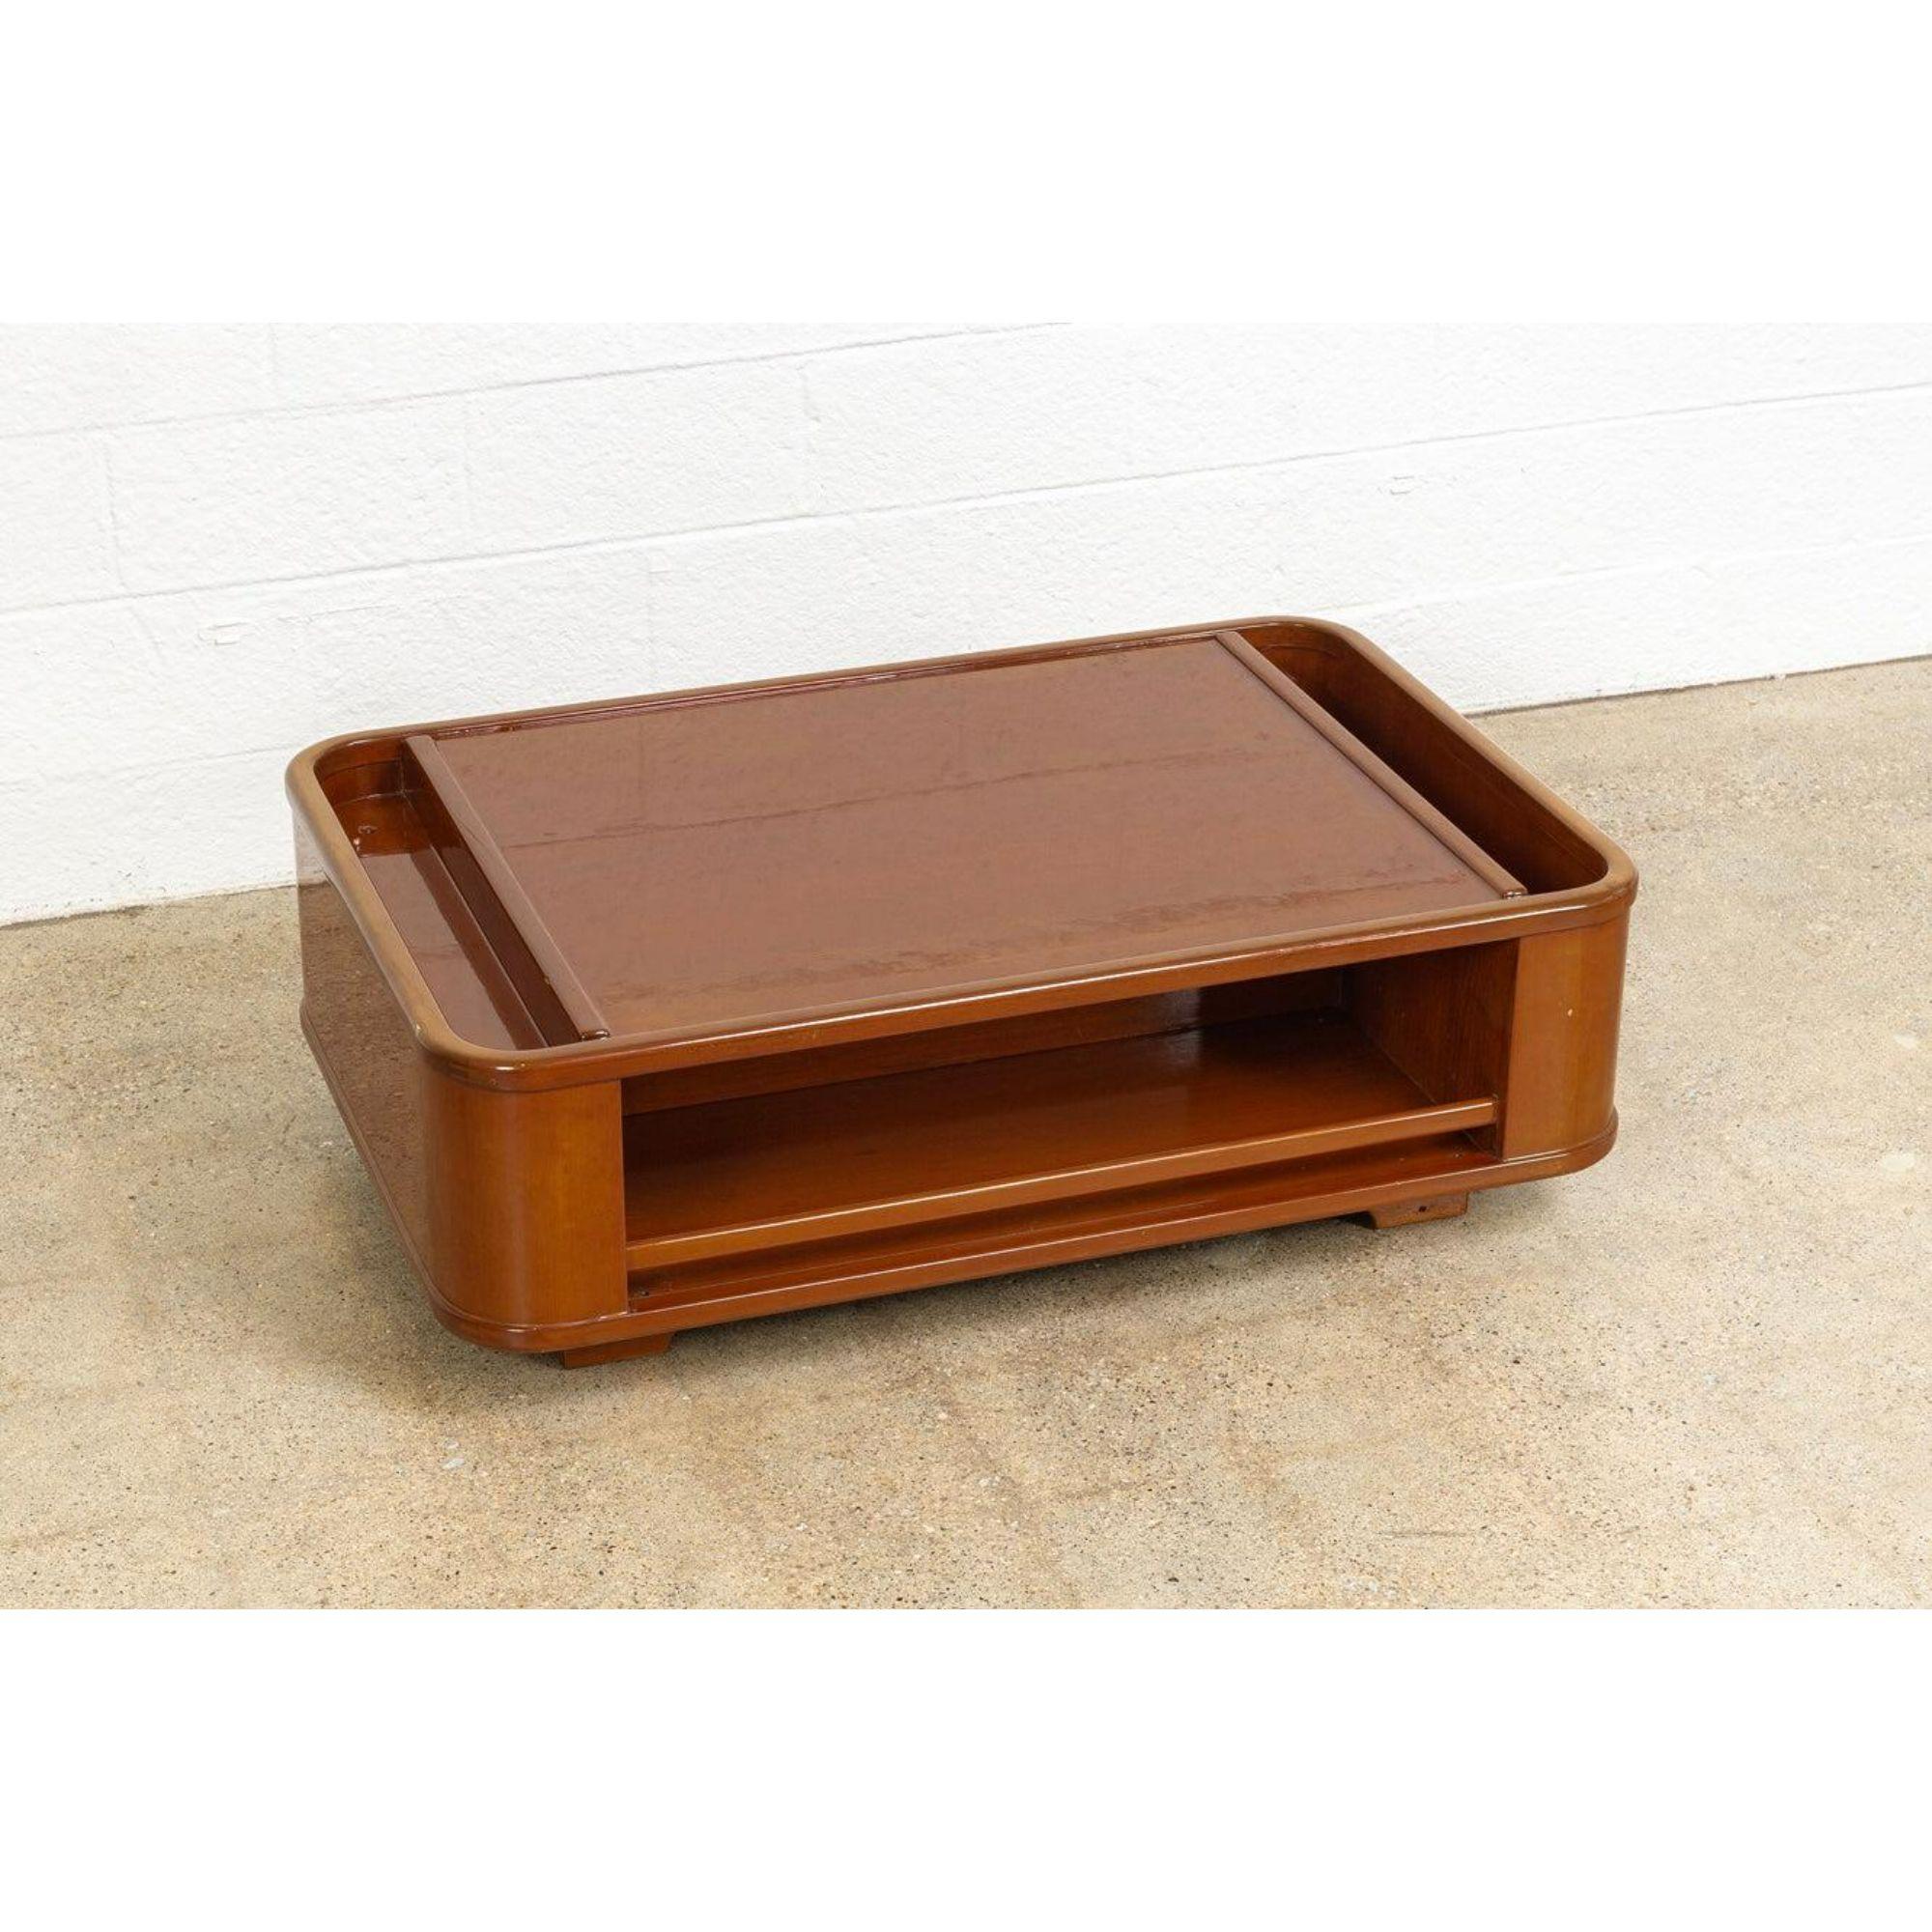 This vintage midcentury Italian coffee table circa 1970 has fabulous mod style. The Minimalist design features a low profile with clean geometric lines and rounded edges. It is very well constructed from solid wood with a glossy lacquered enamel